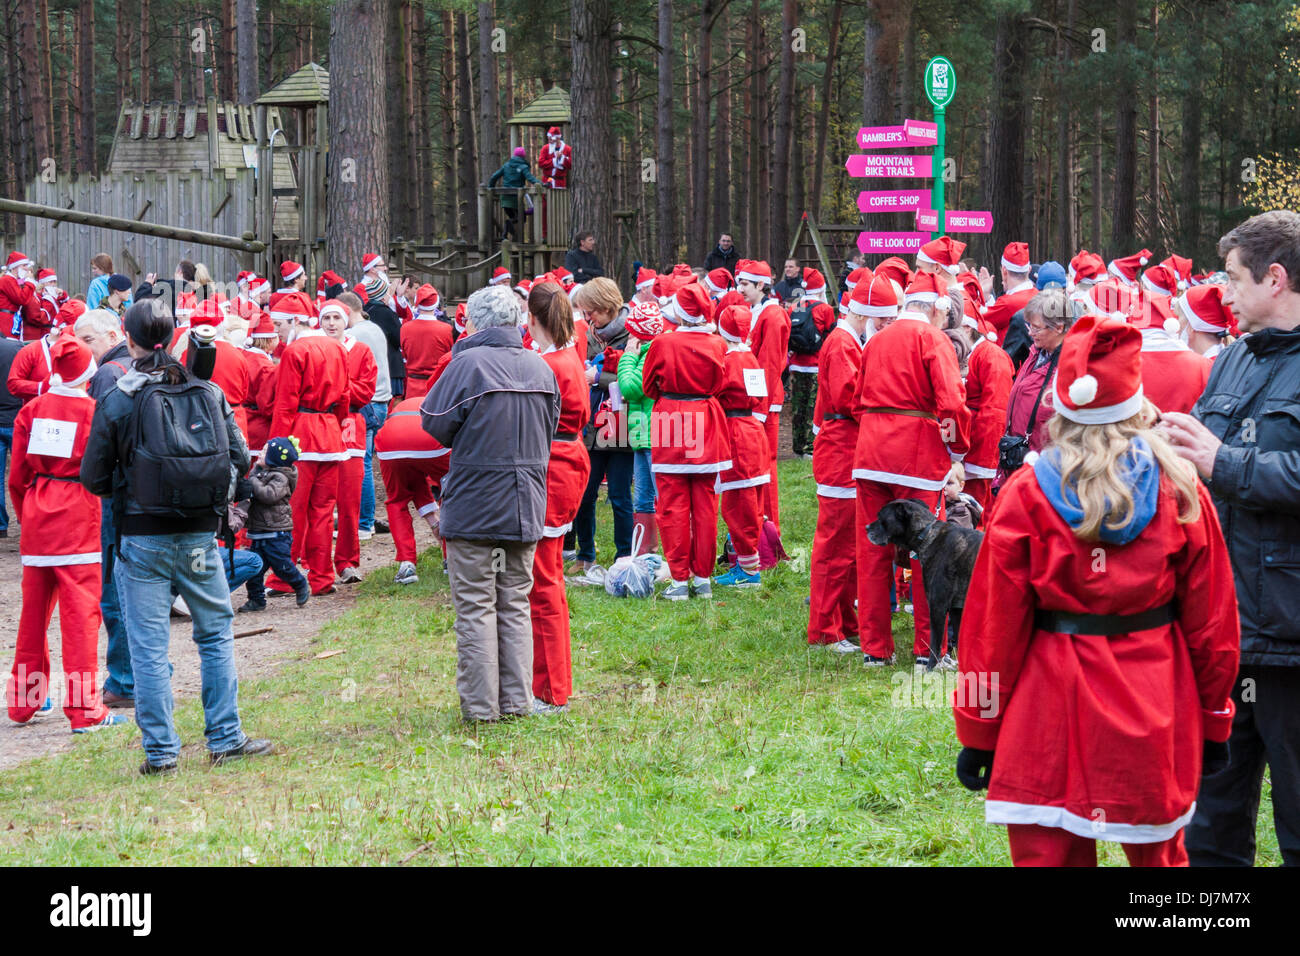 Hundreds of fund-raisers dressed as Santas run in the annual 'Santa Dash' to raise money for the Thames Hospice charity. Swinley Forest, Bracknell, Berkshire, England, GB, UK Stock Photo